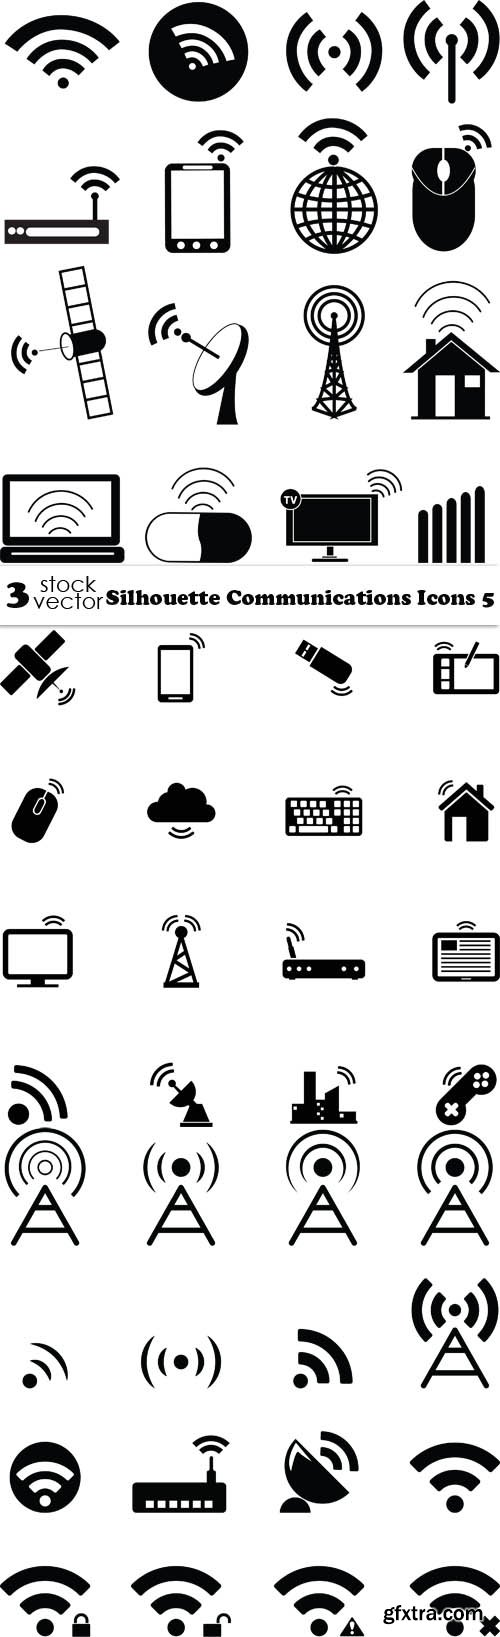 Vectors - Silhouette Communications Icons 5